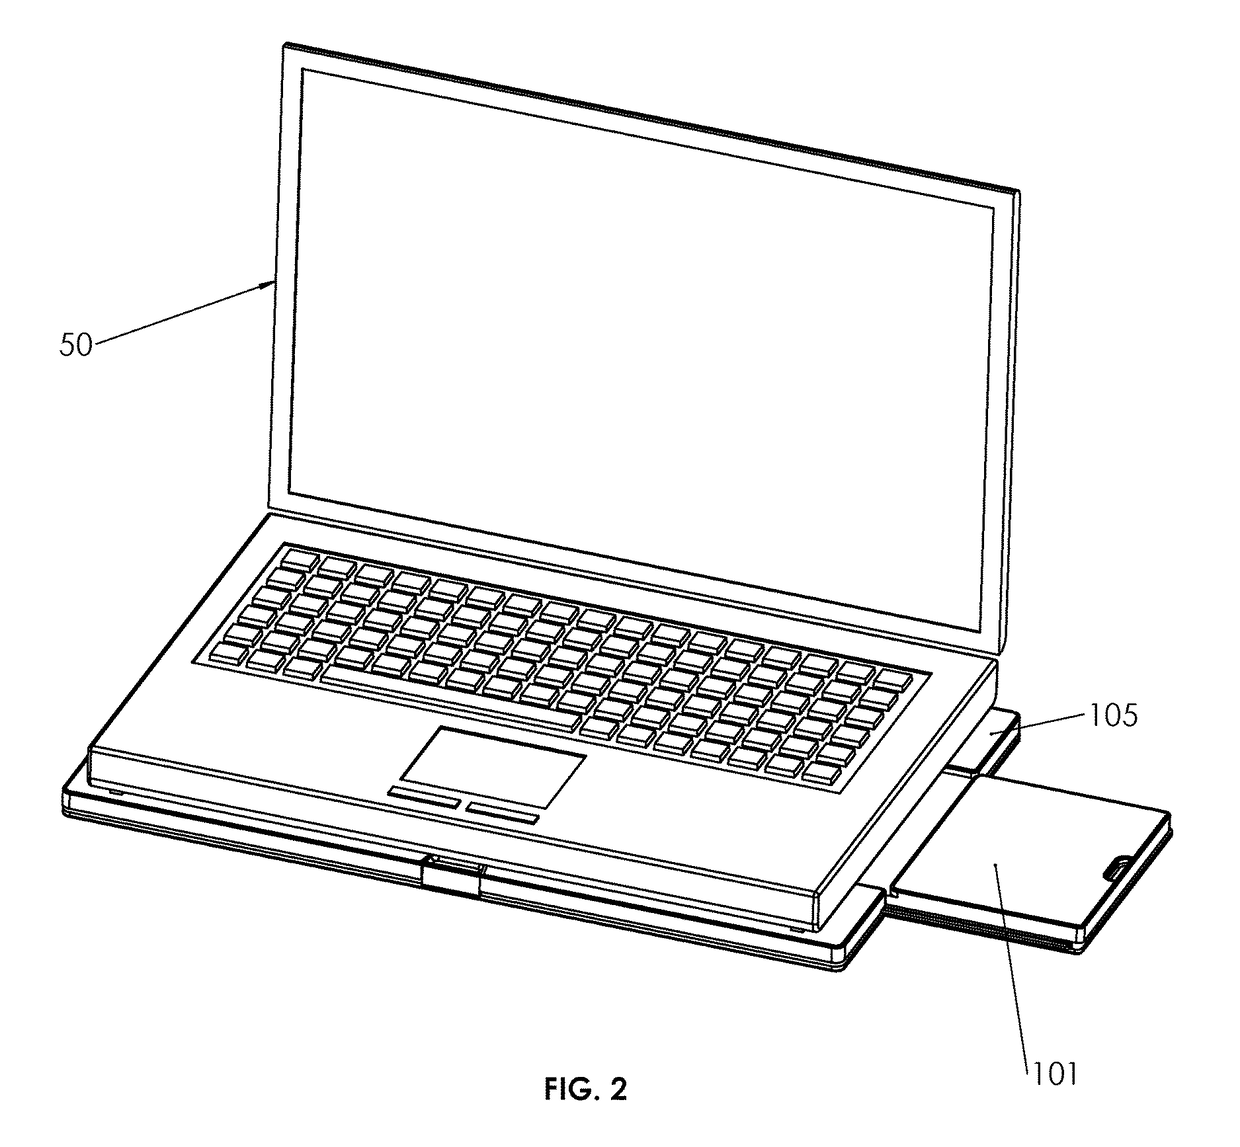 Vibration cancelling platform for use with laptops or tablet computers used in moving vehicles